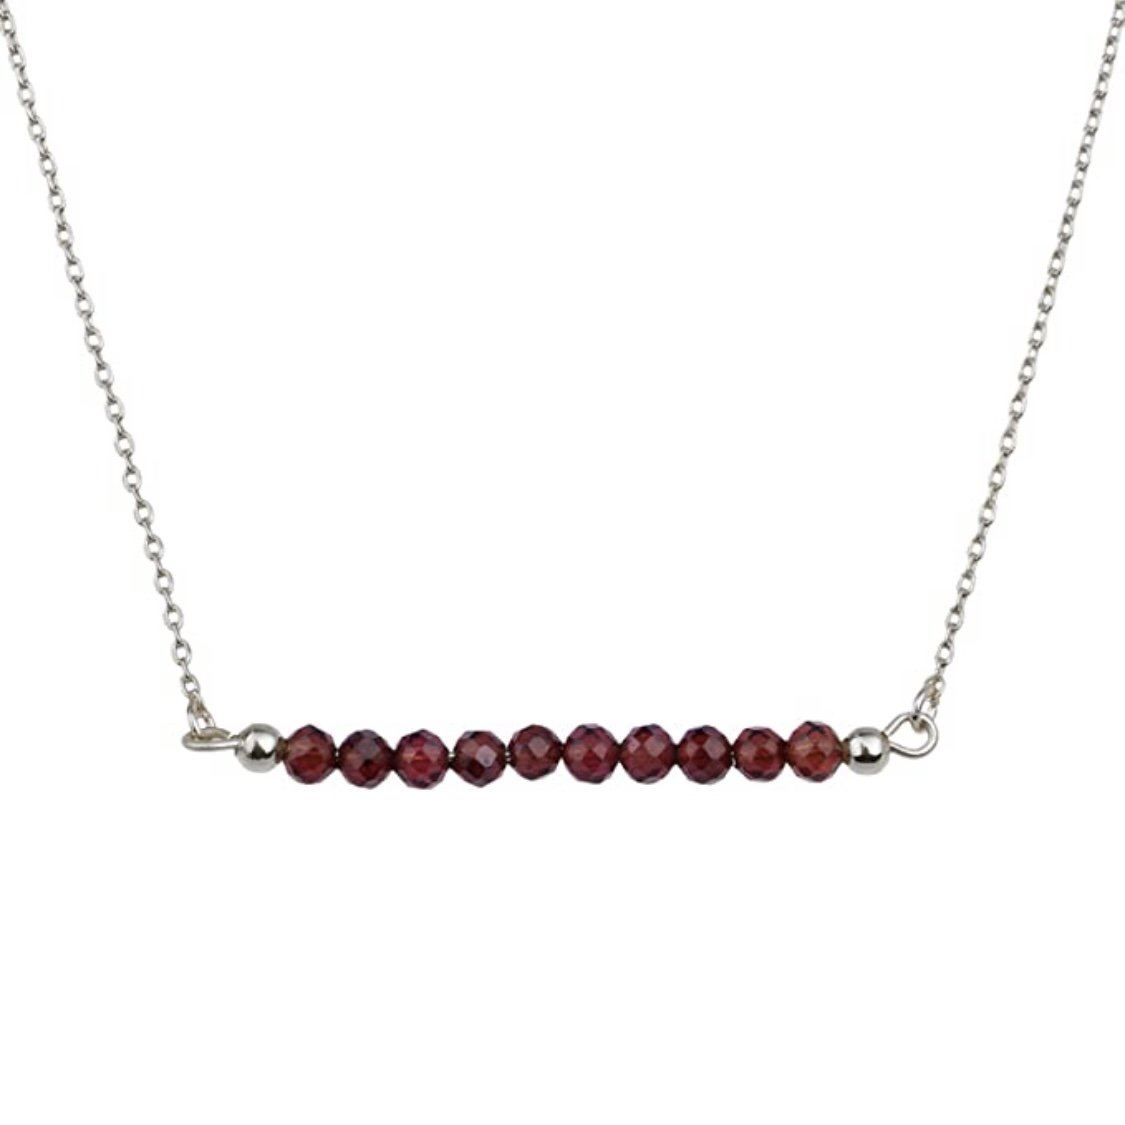 Birthstone Bar Necklace - The Vintage Pearl